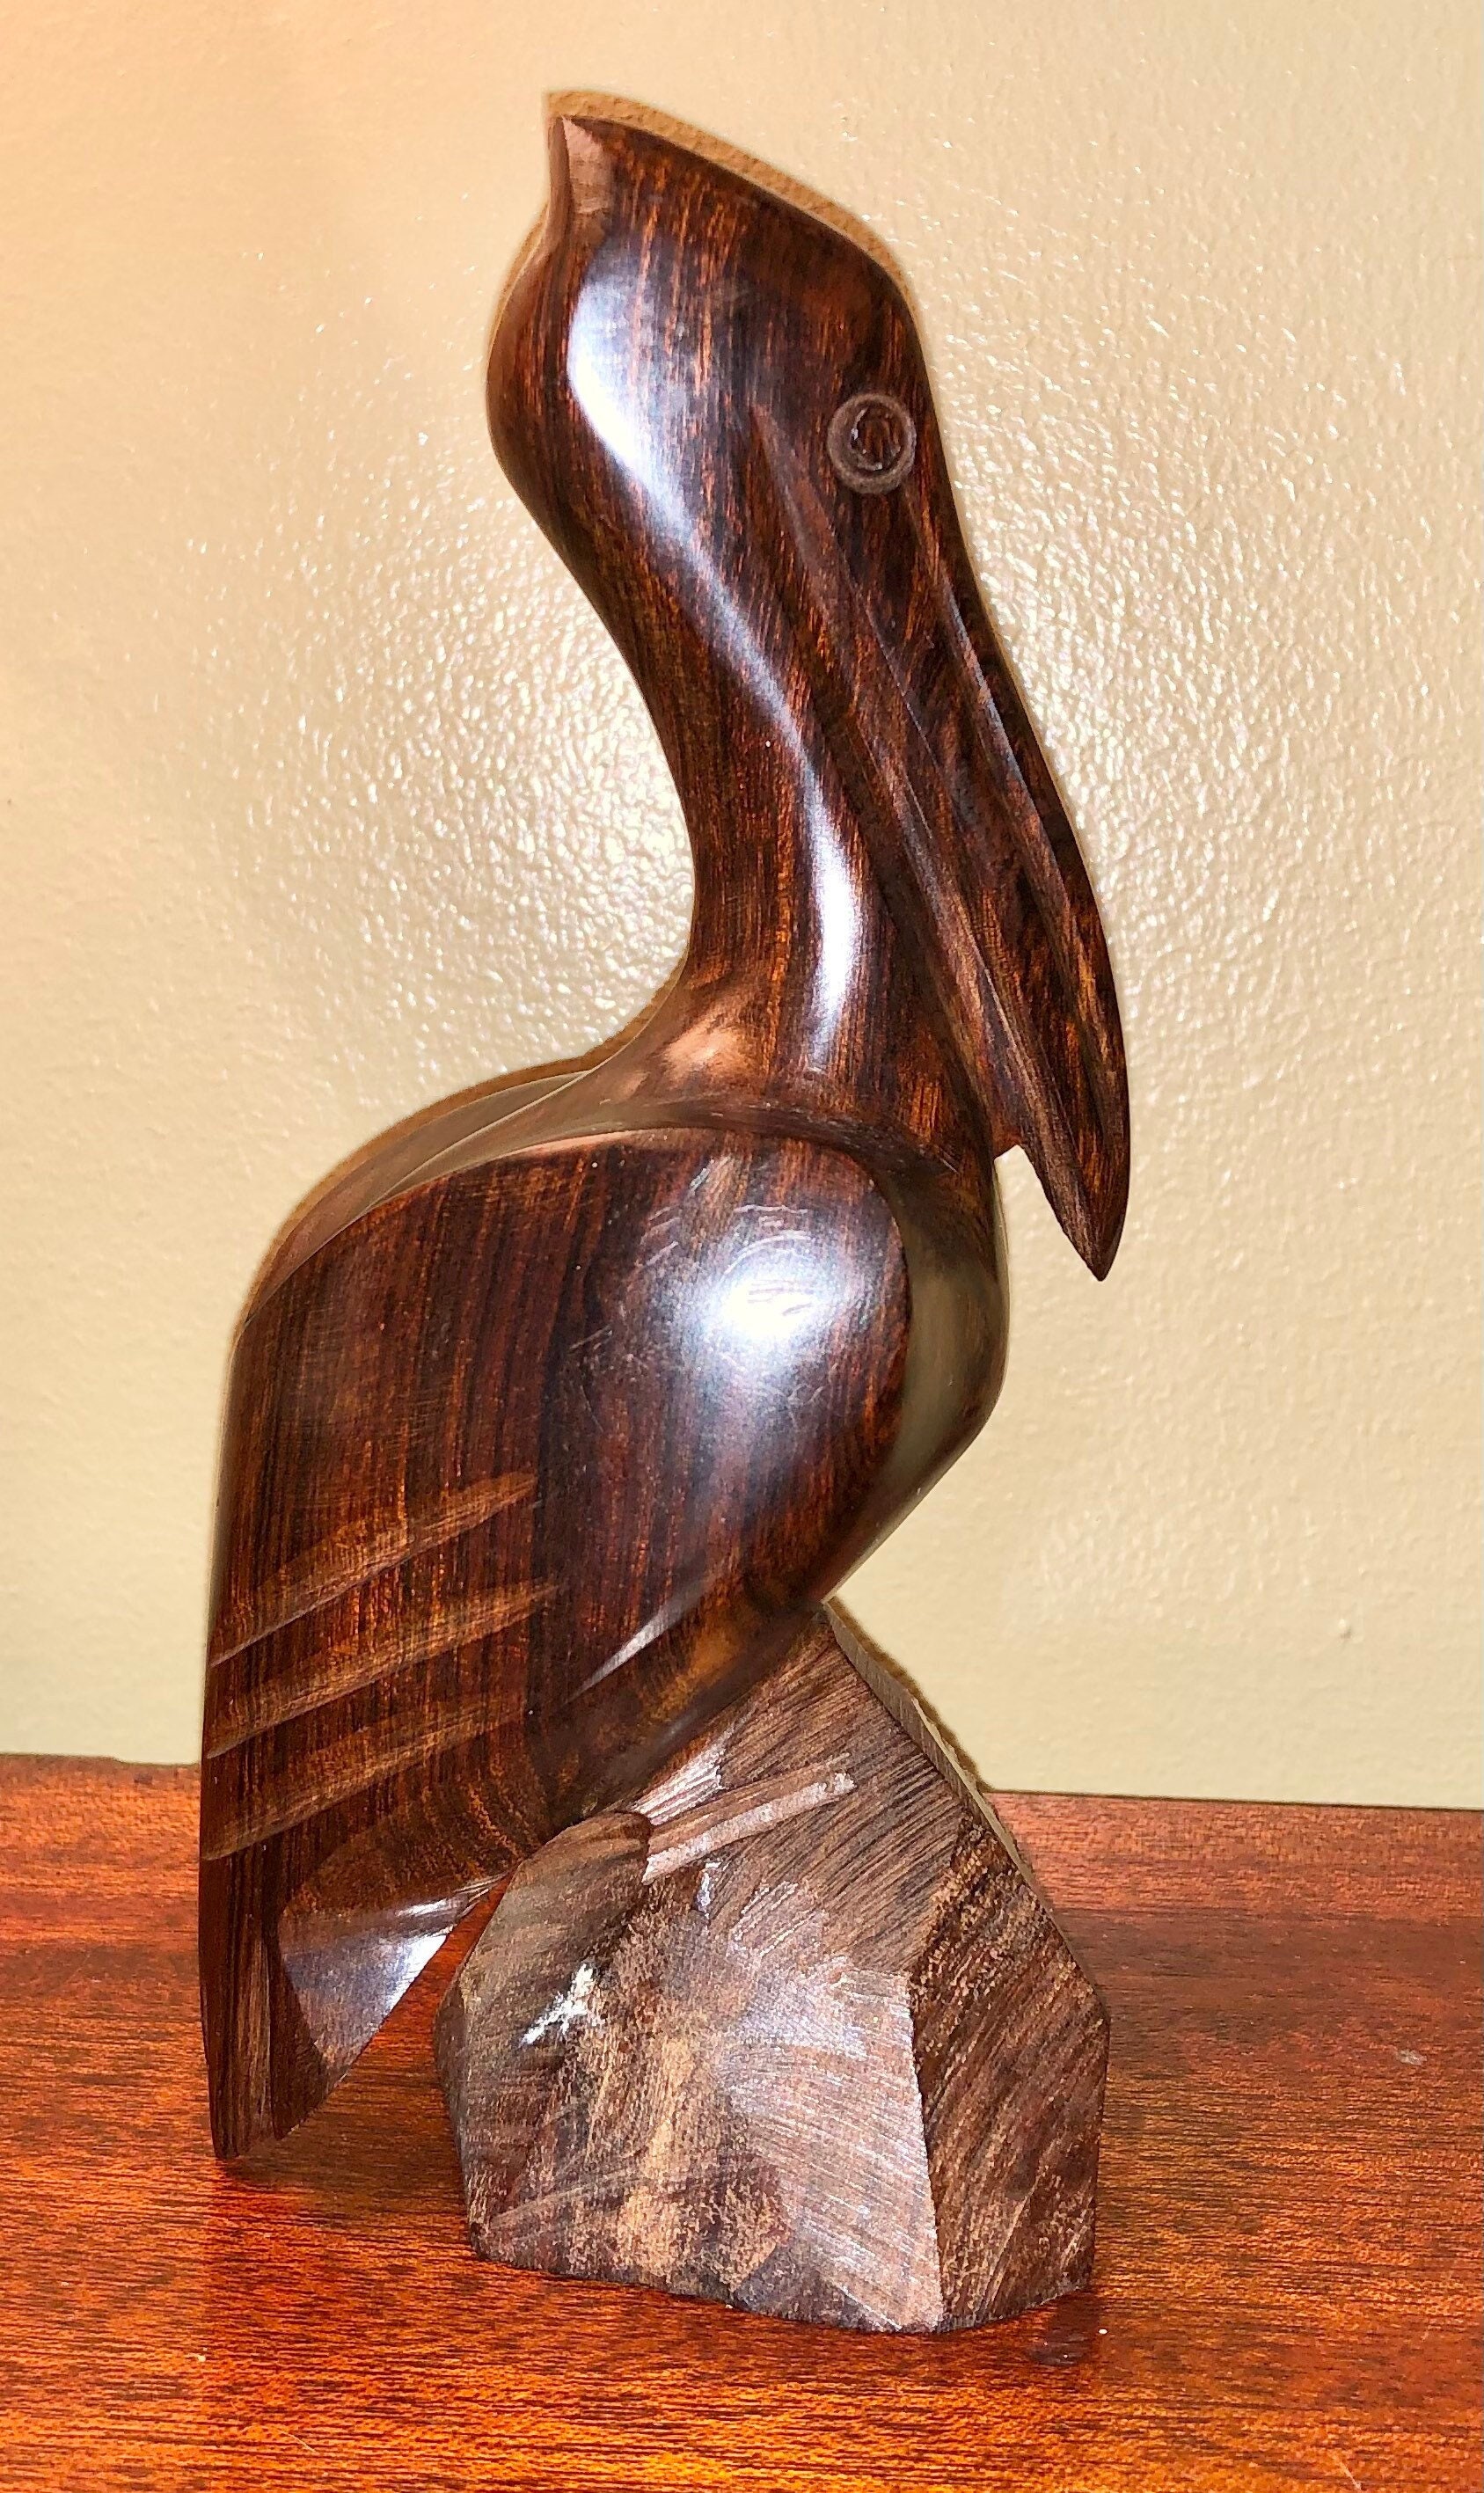 Details about   Unique Hand Carved Ironwood Pelican Figurine Wood Carving 6 to 6.5" High 